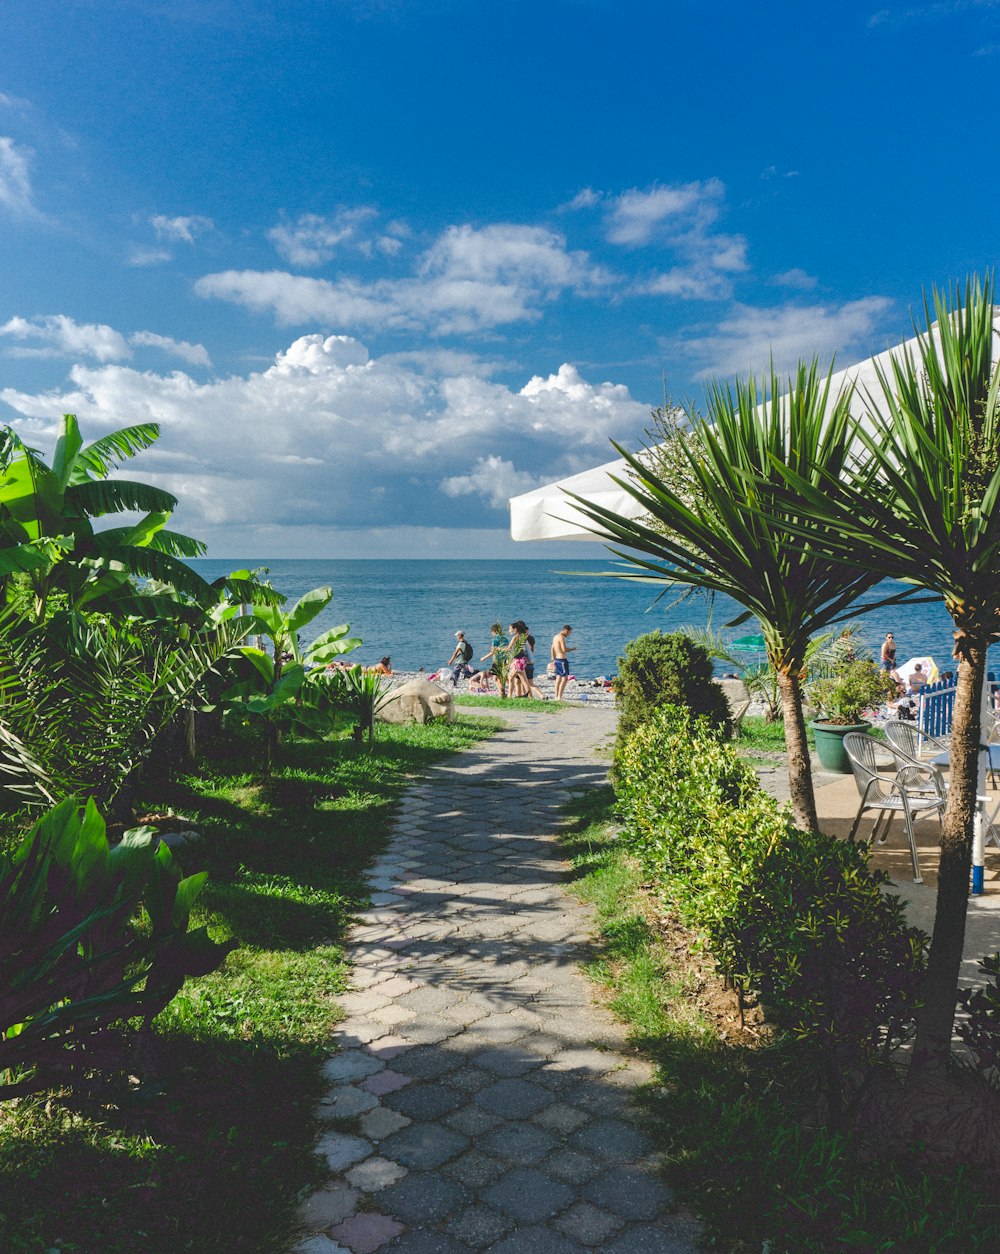 people walking on pathway near sea under blue sky during daytime